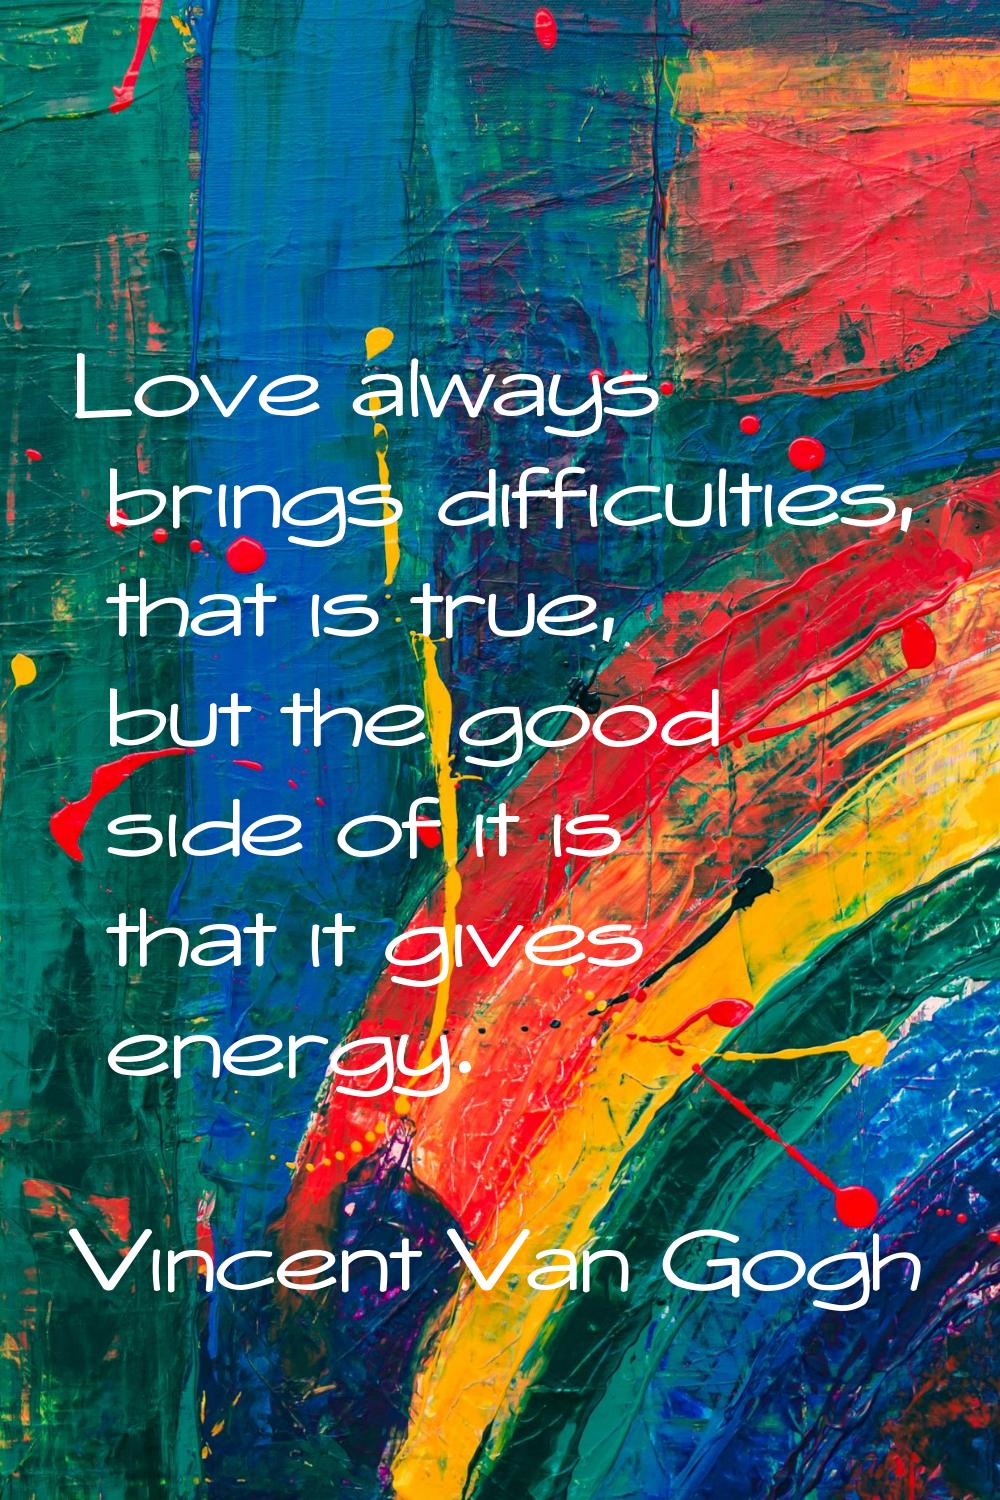 Love always brings difficulties, that is true, but the good side of it is that it gives energy.